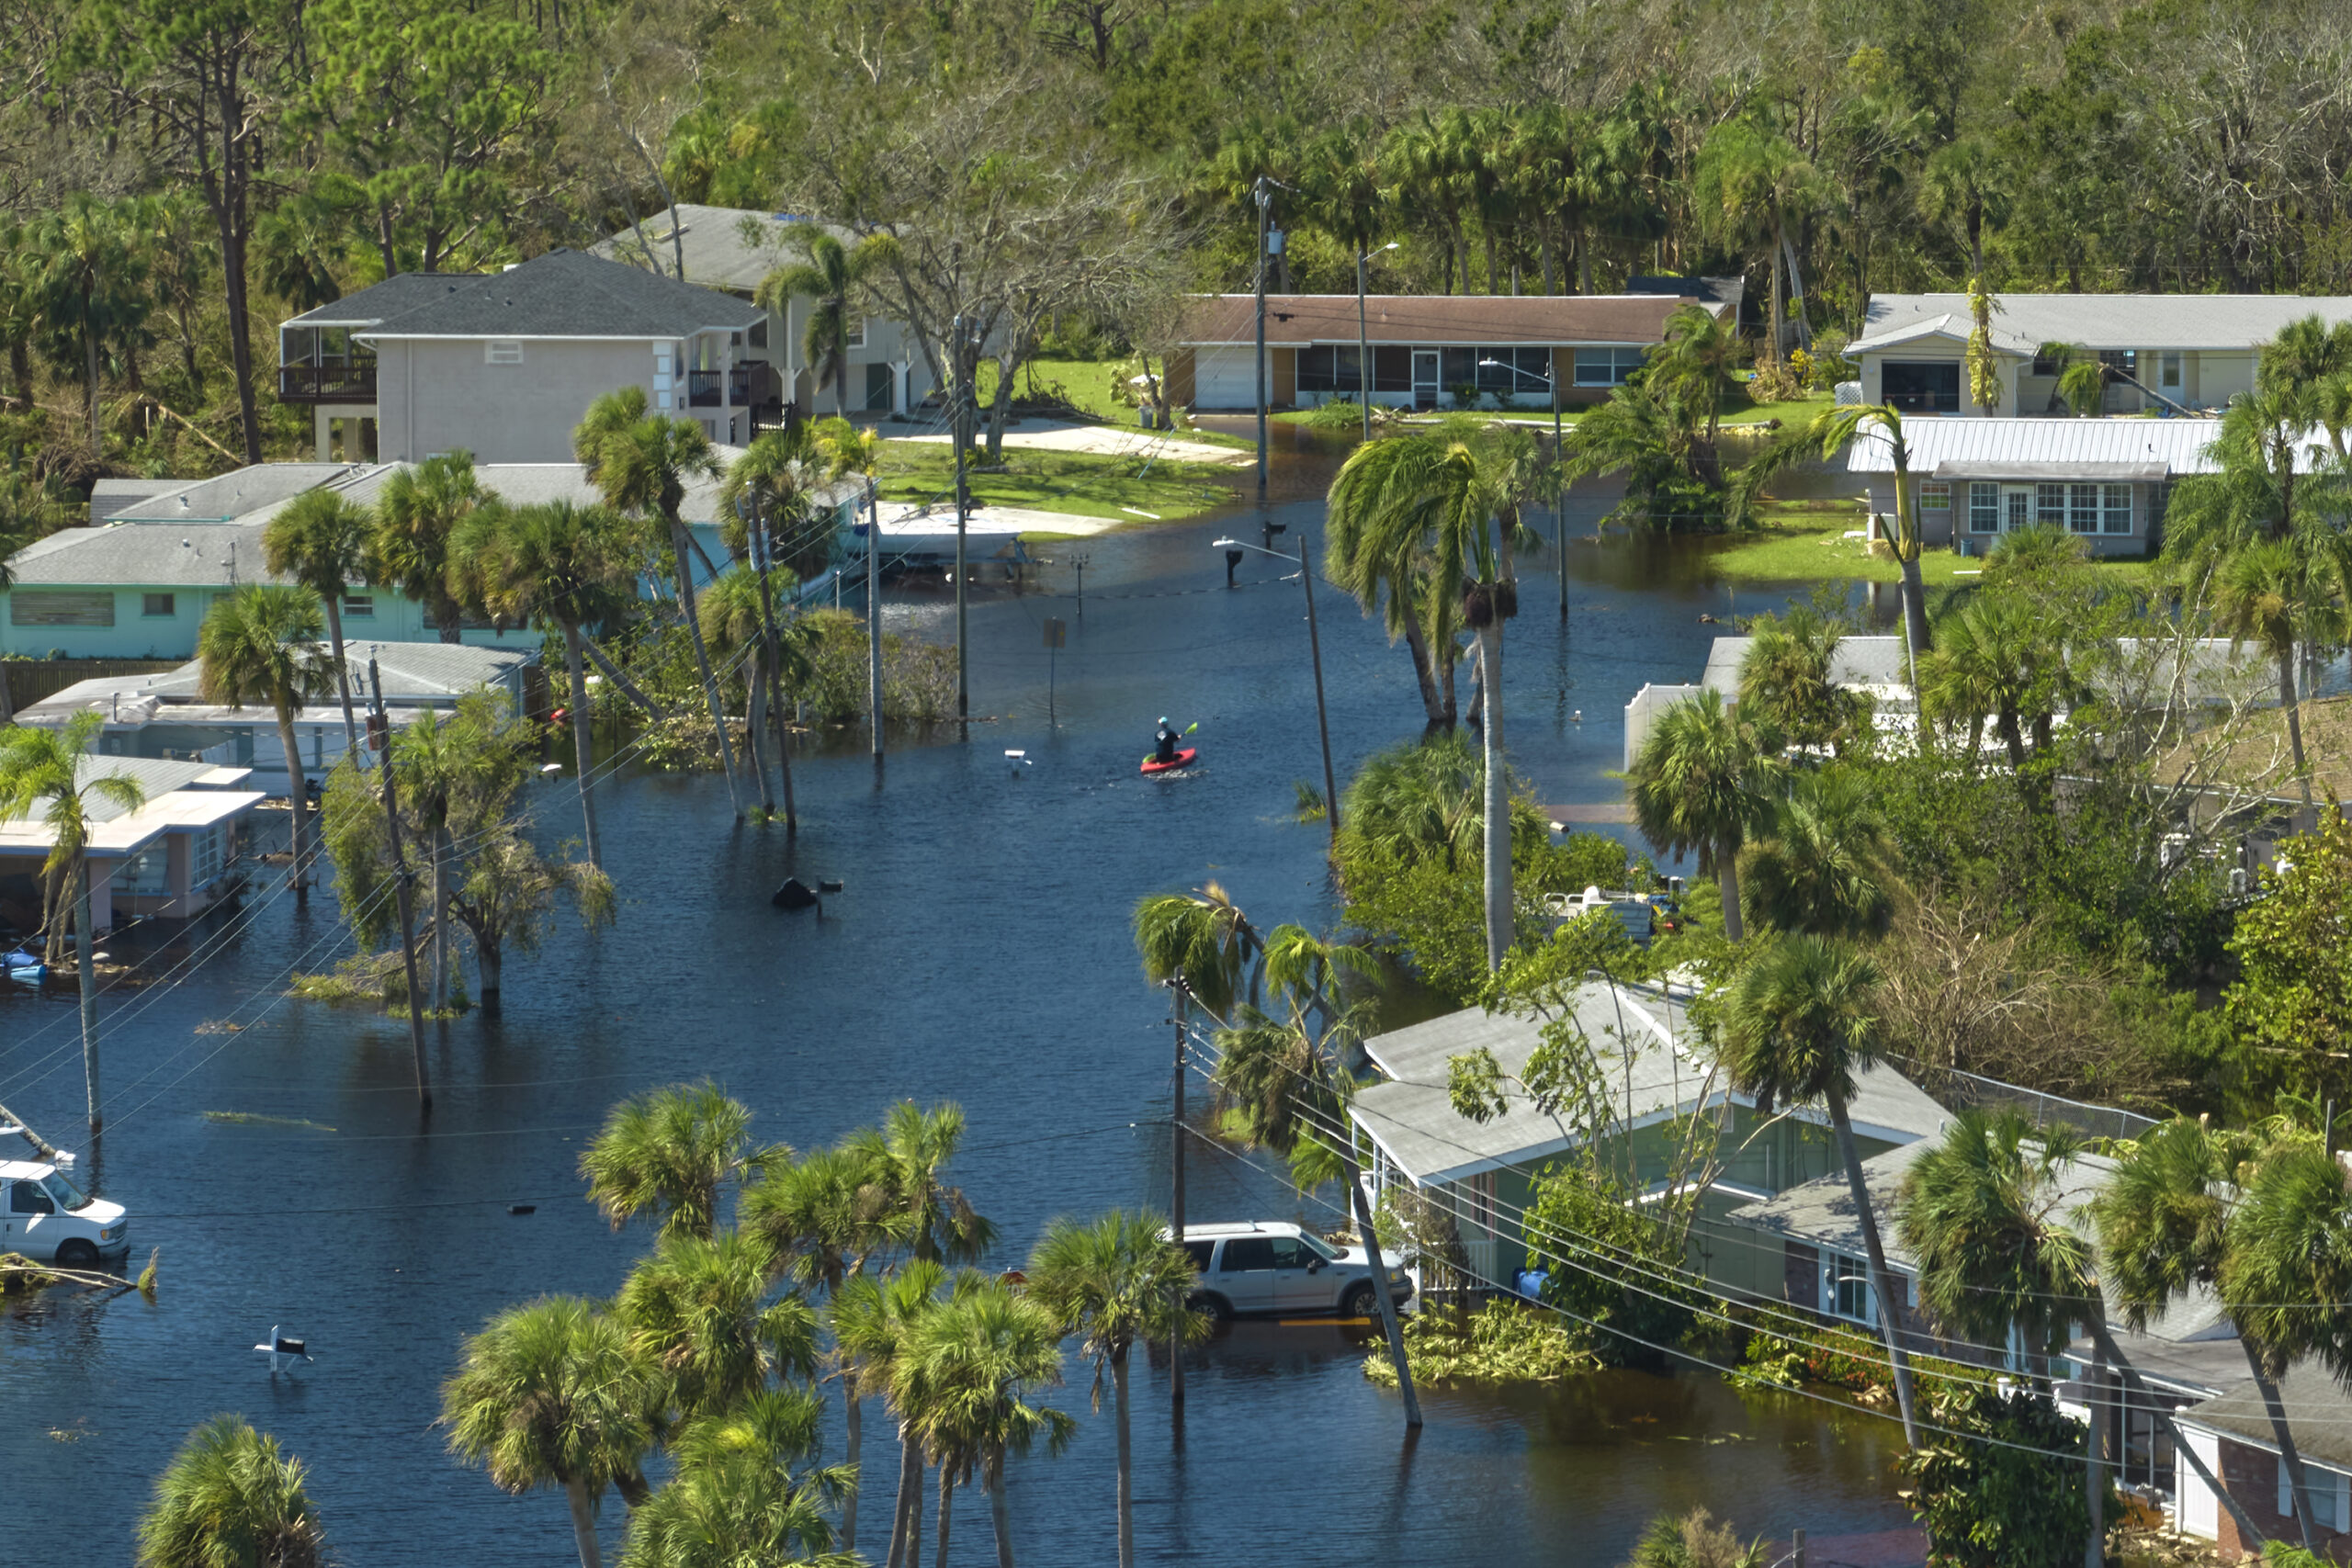 Insurers and Governments Tackle Climate Change Impact on Housing Market in the Sun Belt